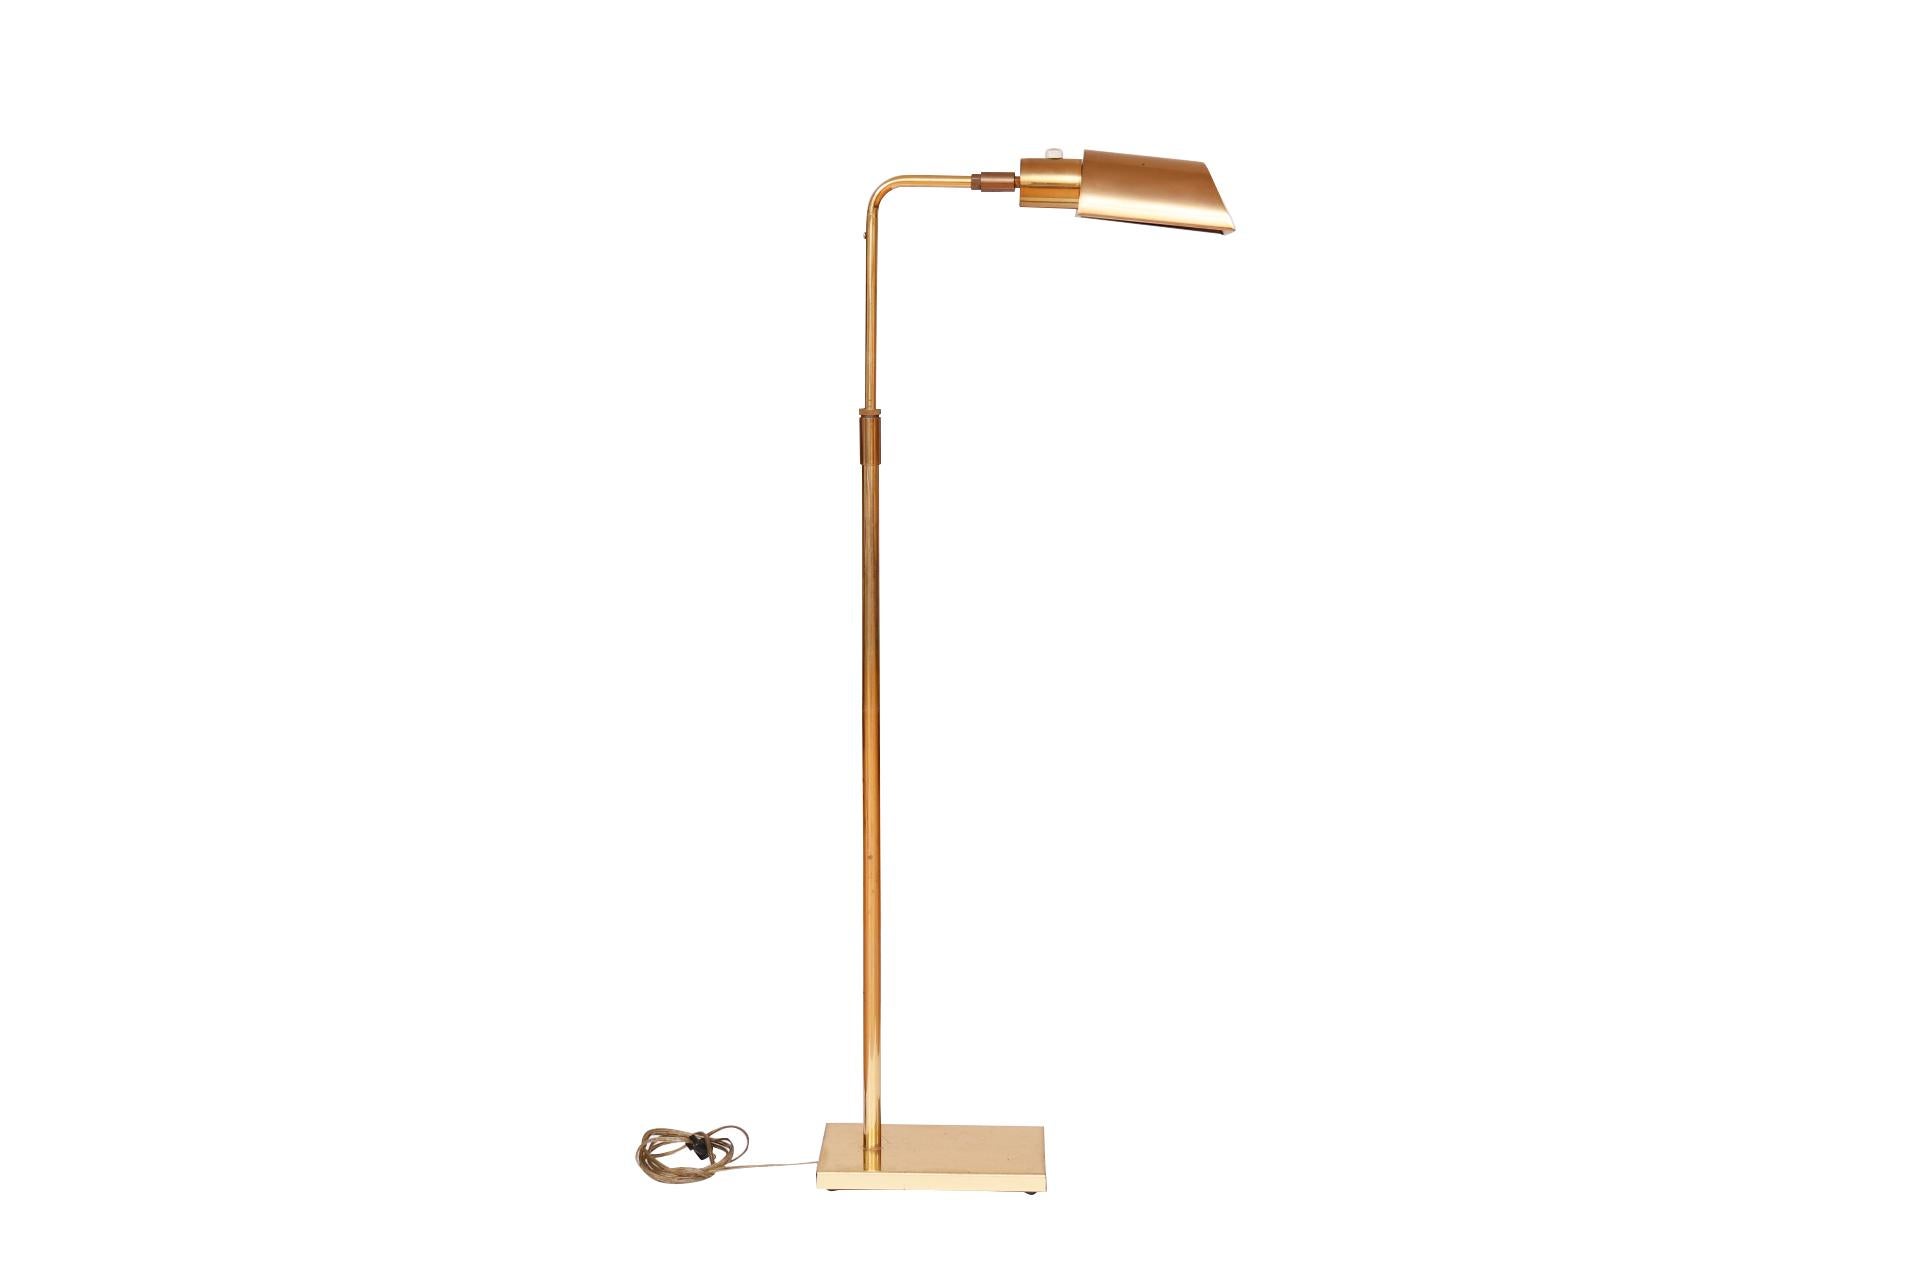 A 1960's Mid-Century Modern adjustable pharmacy floor lamp in brass, made by Koch + Lowy. A half cylindrical shaped brass shade can be angled up or down and rotates on a brass column which can also be raised or lowered. Stands on a sleek weighted